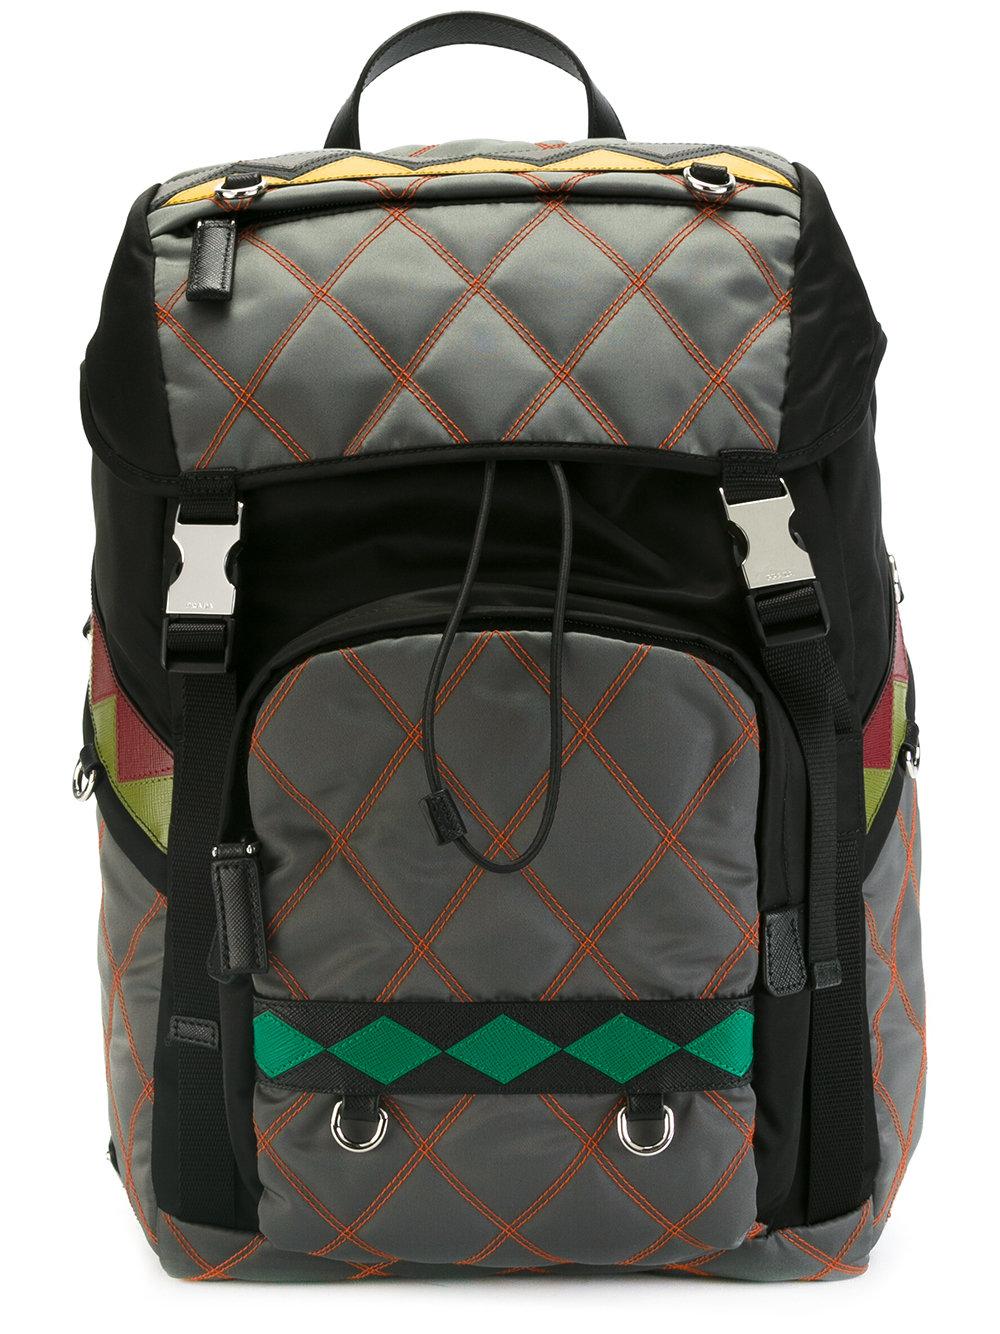 Lyst - Prada - Quilted Backpack - Men - Leather/nylon - One Size in Gray for Men